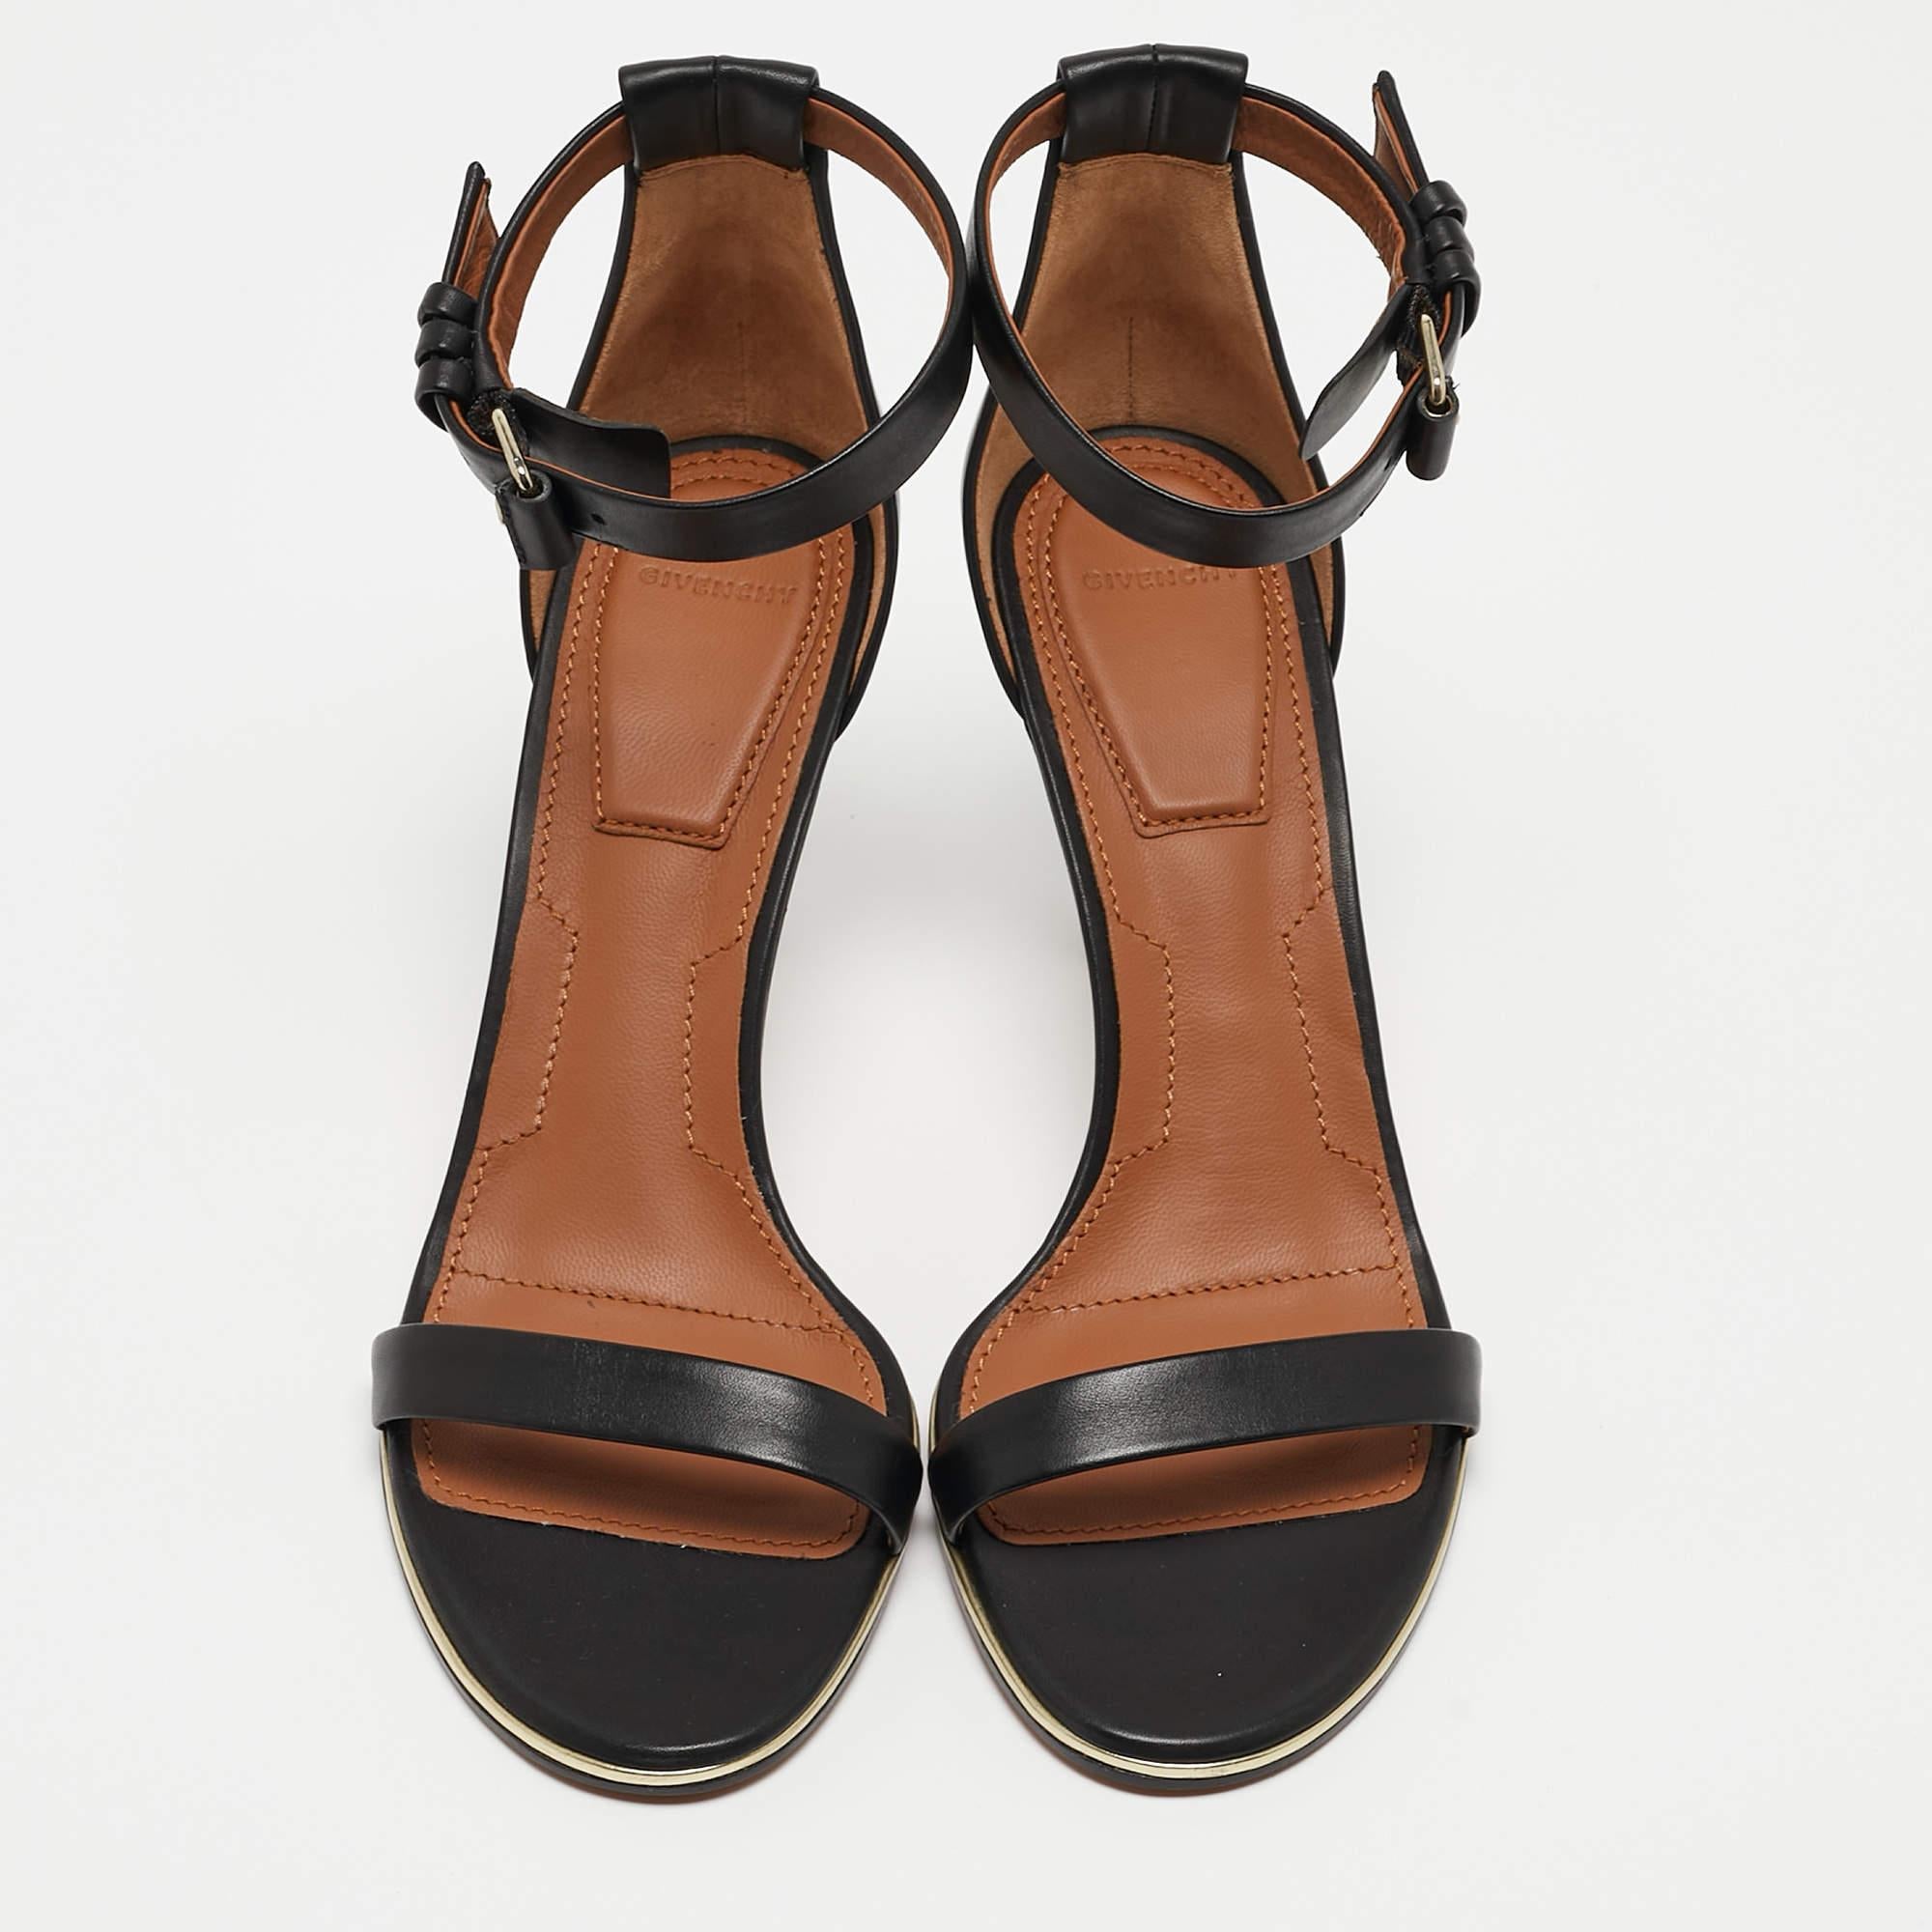 Wear these designer sandals to spruce up any outfit. They are versatile, chic, and can be easily styled. Made using quality materials, these sandals are well-built and long-lasting.

Includes
Original Dustbag, Original Box, Extra Heel Tip, Info